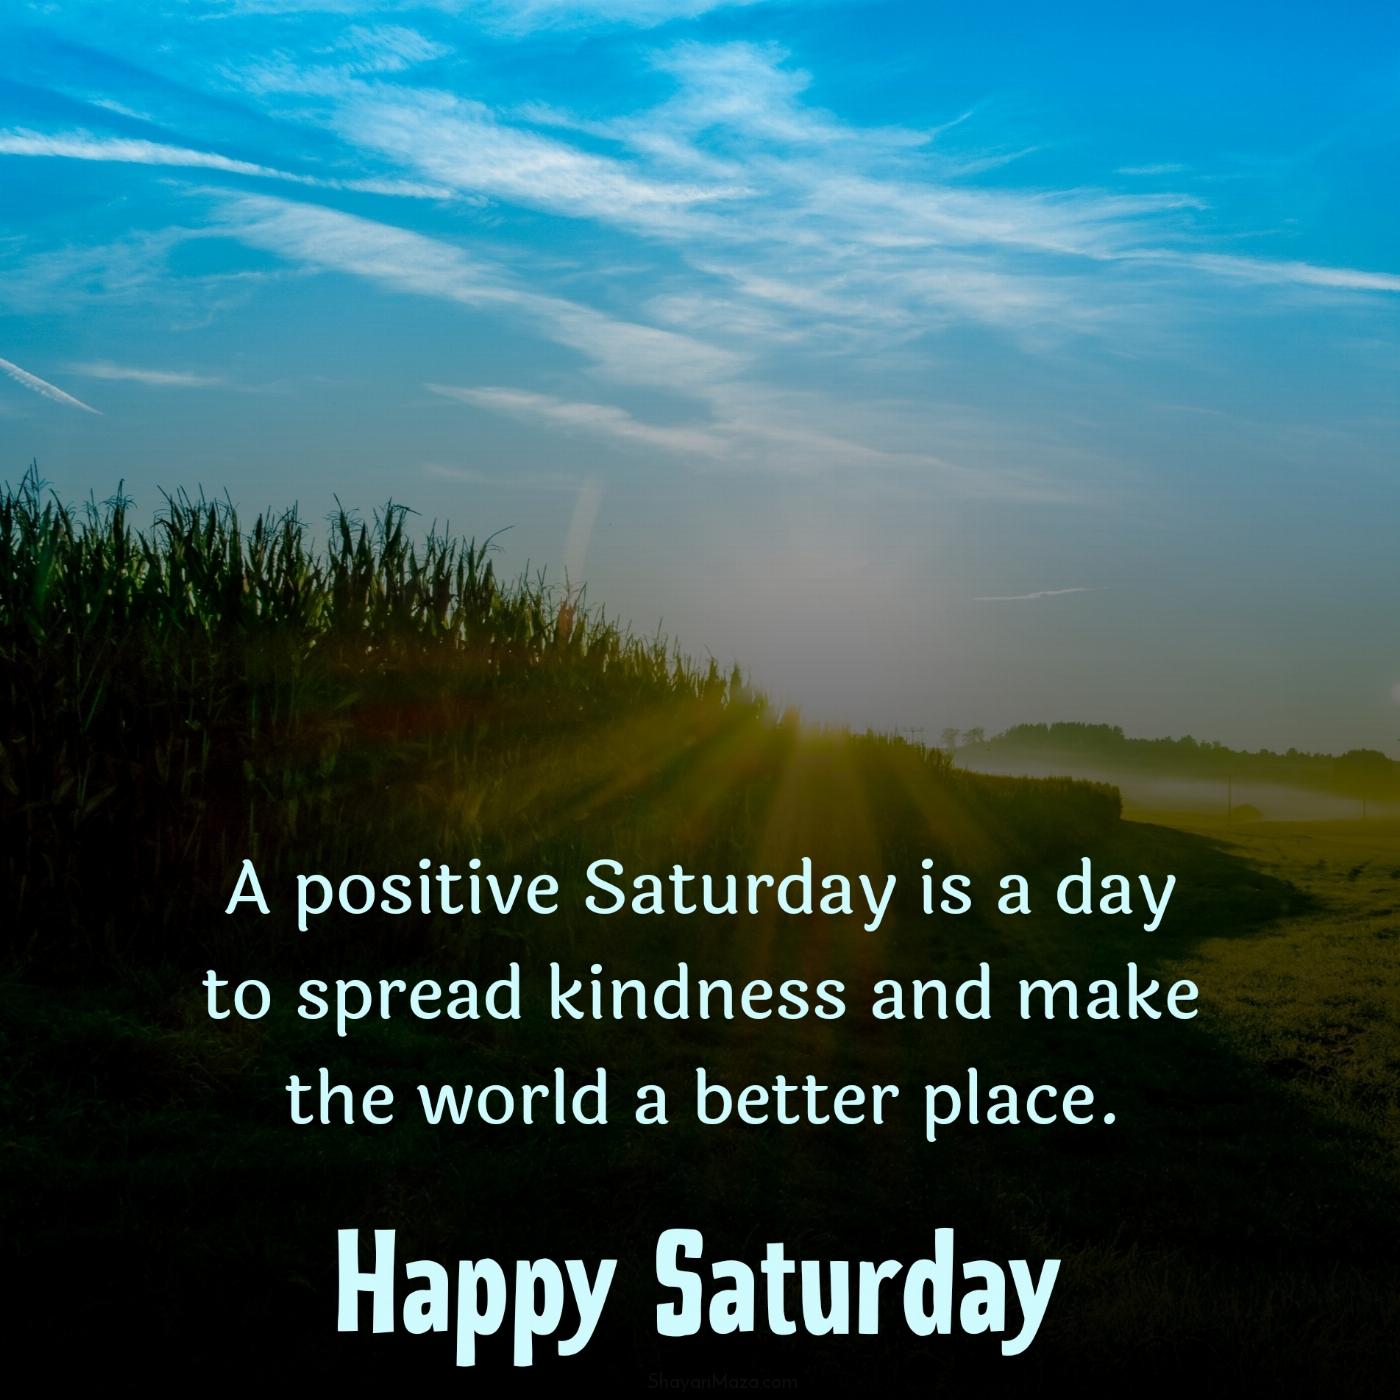 A positive Saturday is a day to spread kindness and make the world